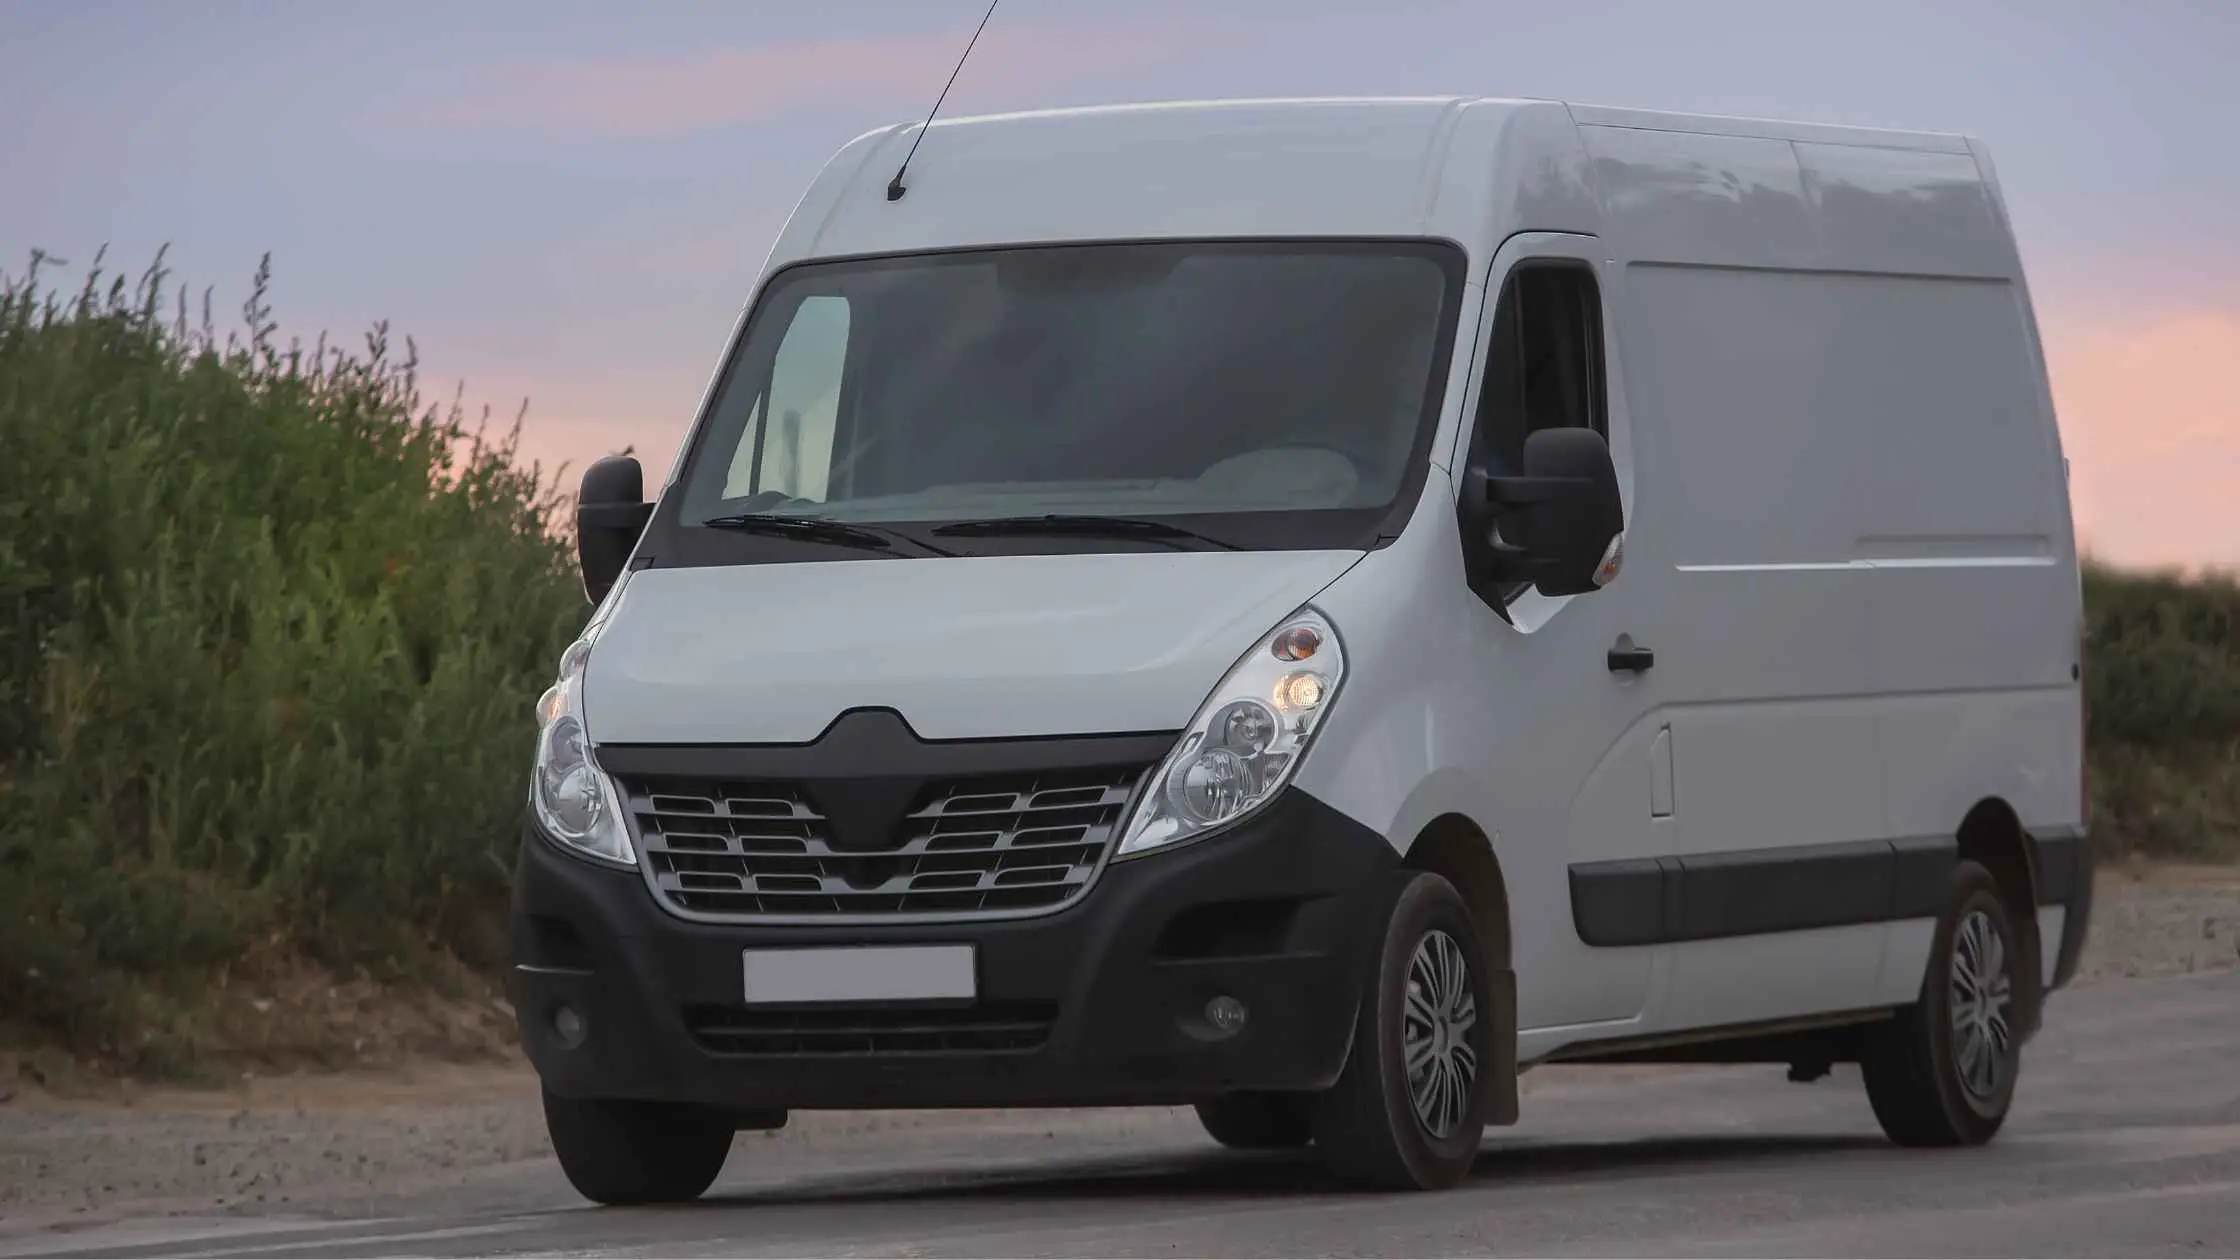 Minibus Hire And Coach Hire Preston: Luxurious Group Travel at Your Fingertips